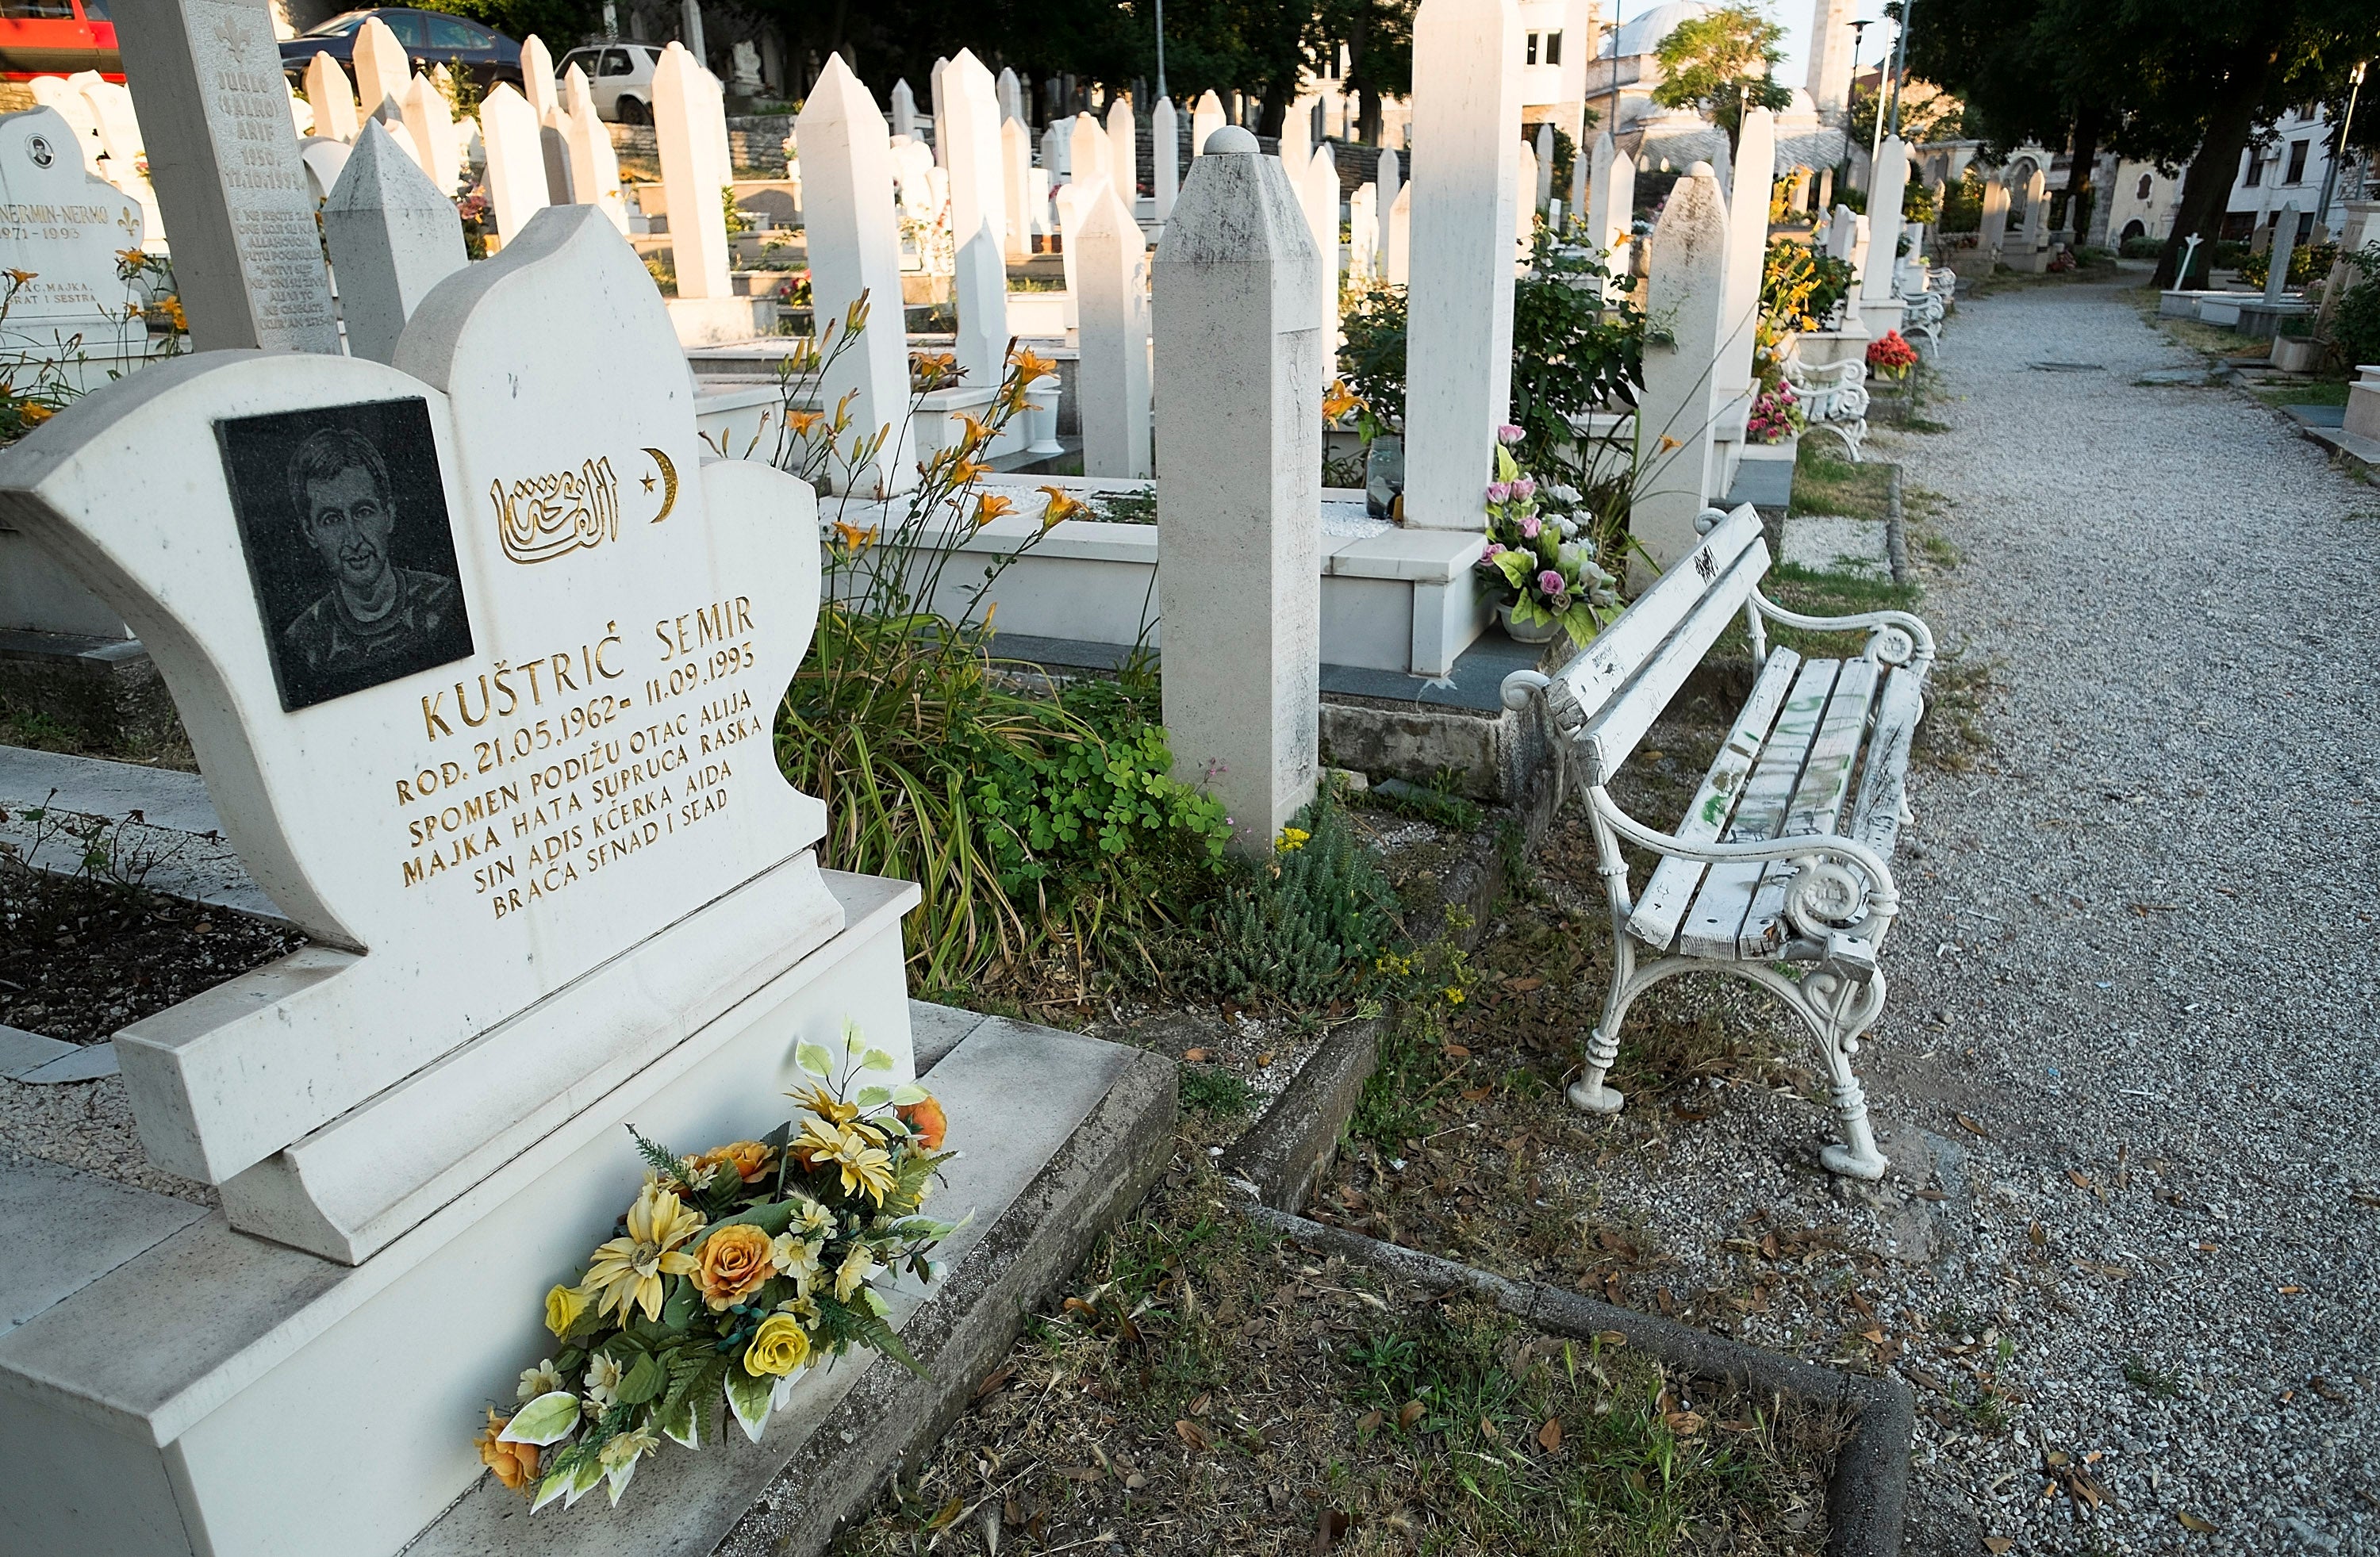 A cemetery in Mostar, Bosnia and Herzegovina, where victims from the Yugoslavian wars are buried.